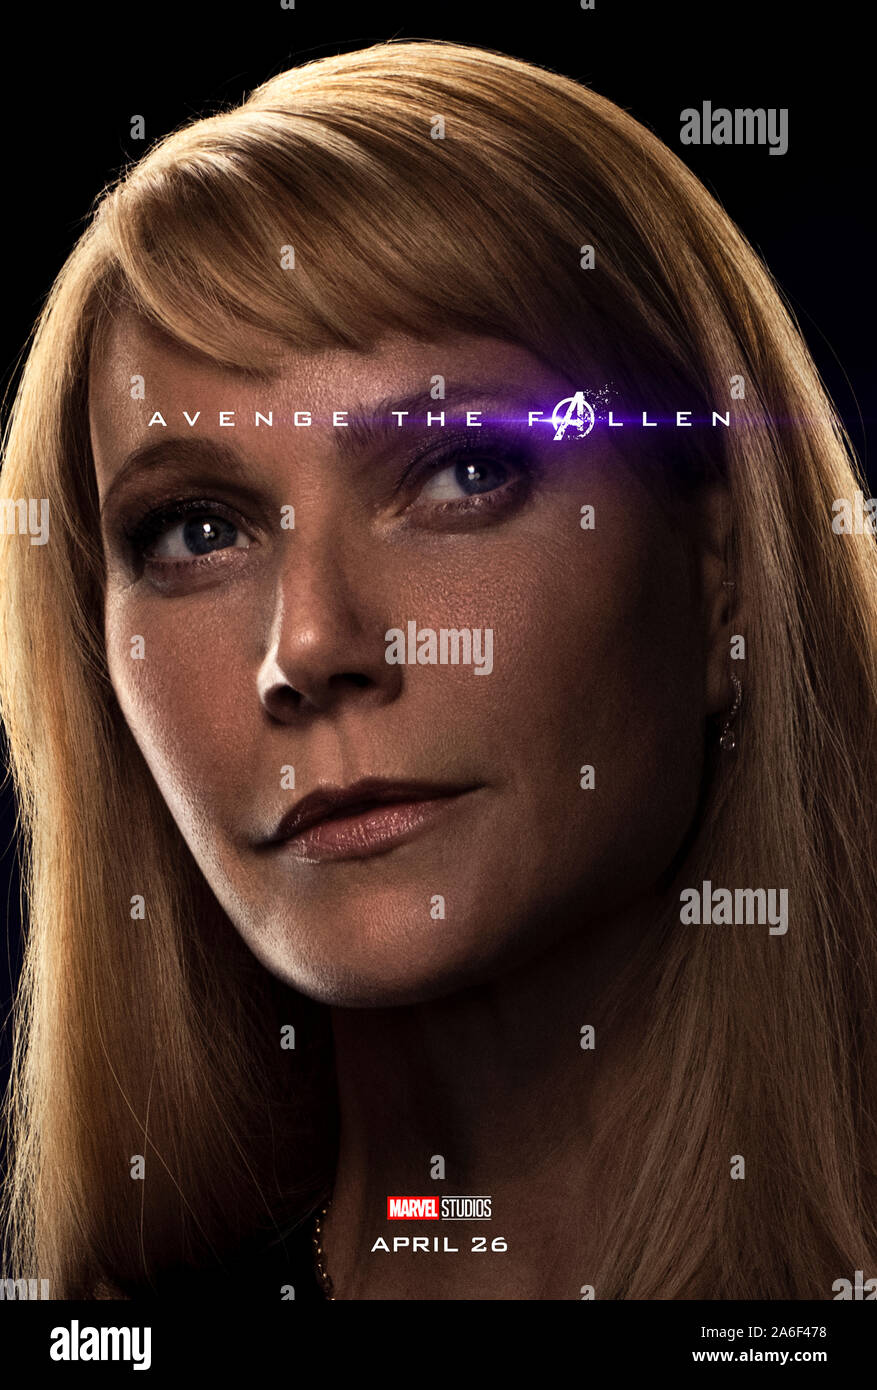 Character advance poster for Avengers: Endgame (2019) directed  by Anthony and Joe Russo starring Gwyneth Paltrow as Pepper Potts. The epic conclusion and 22nd film in the Marvel Cinematic Universe. Stock Photo